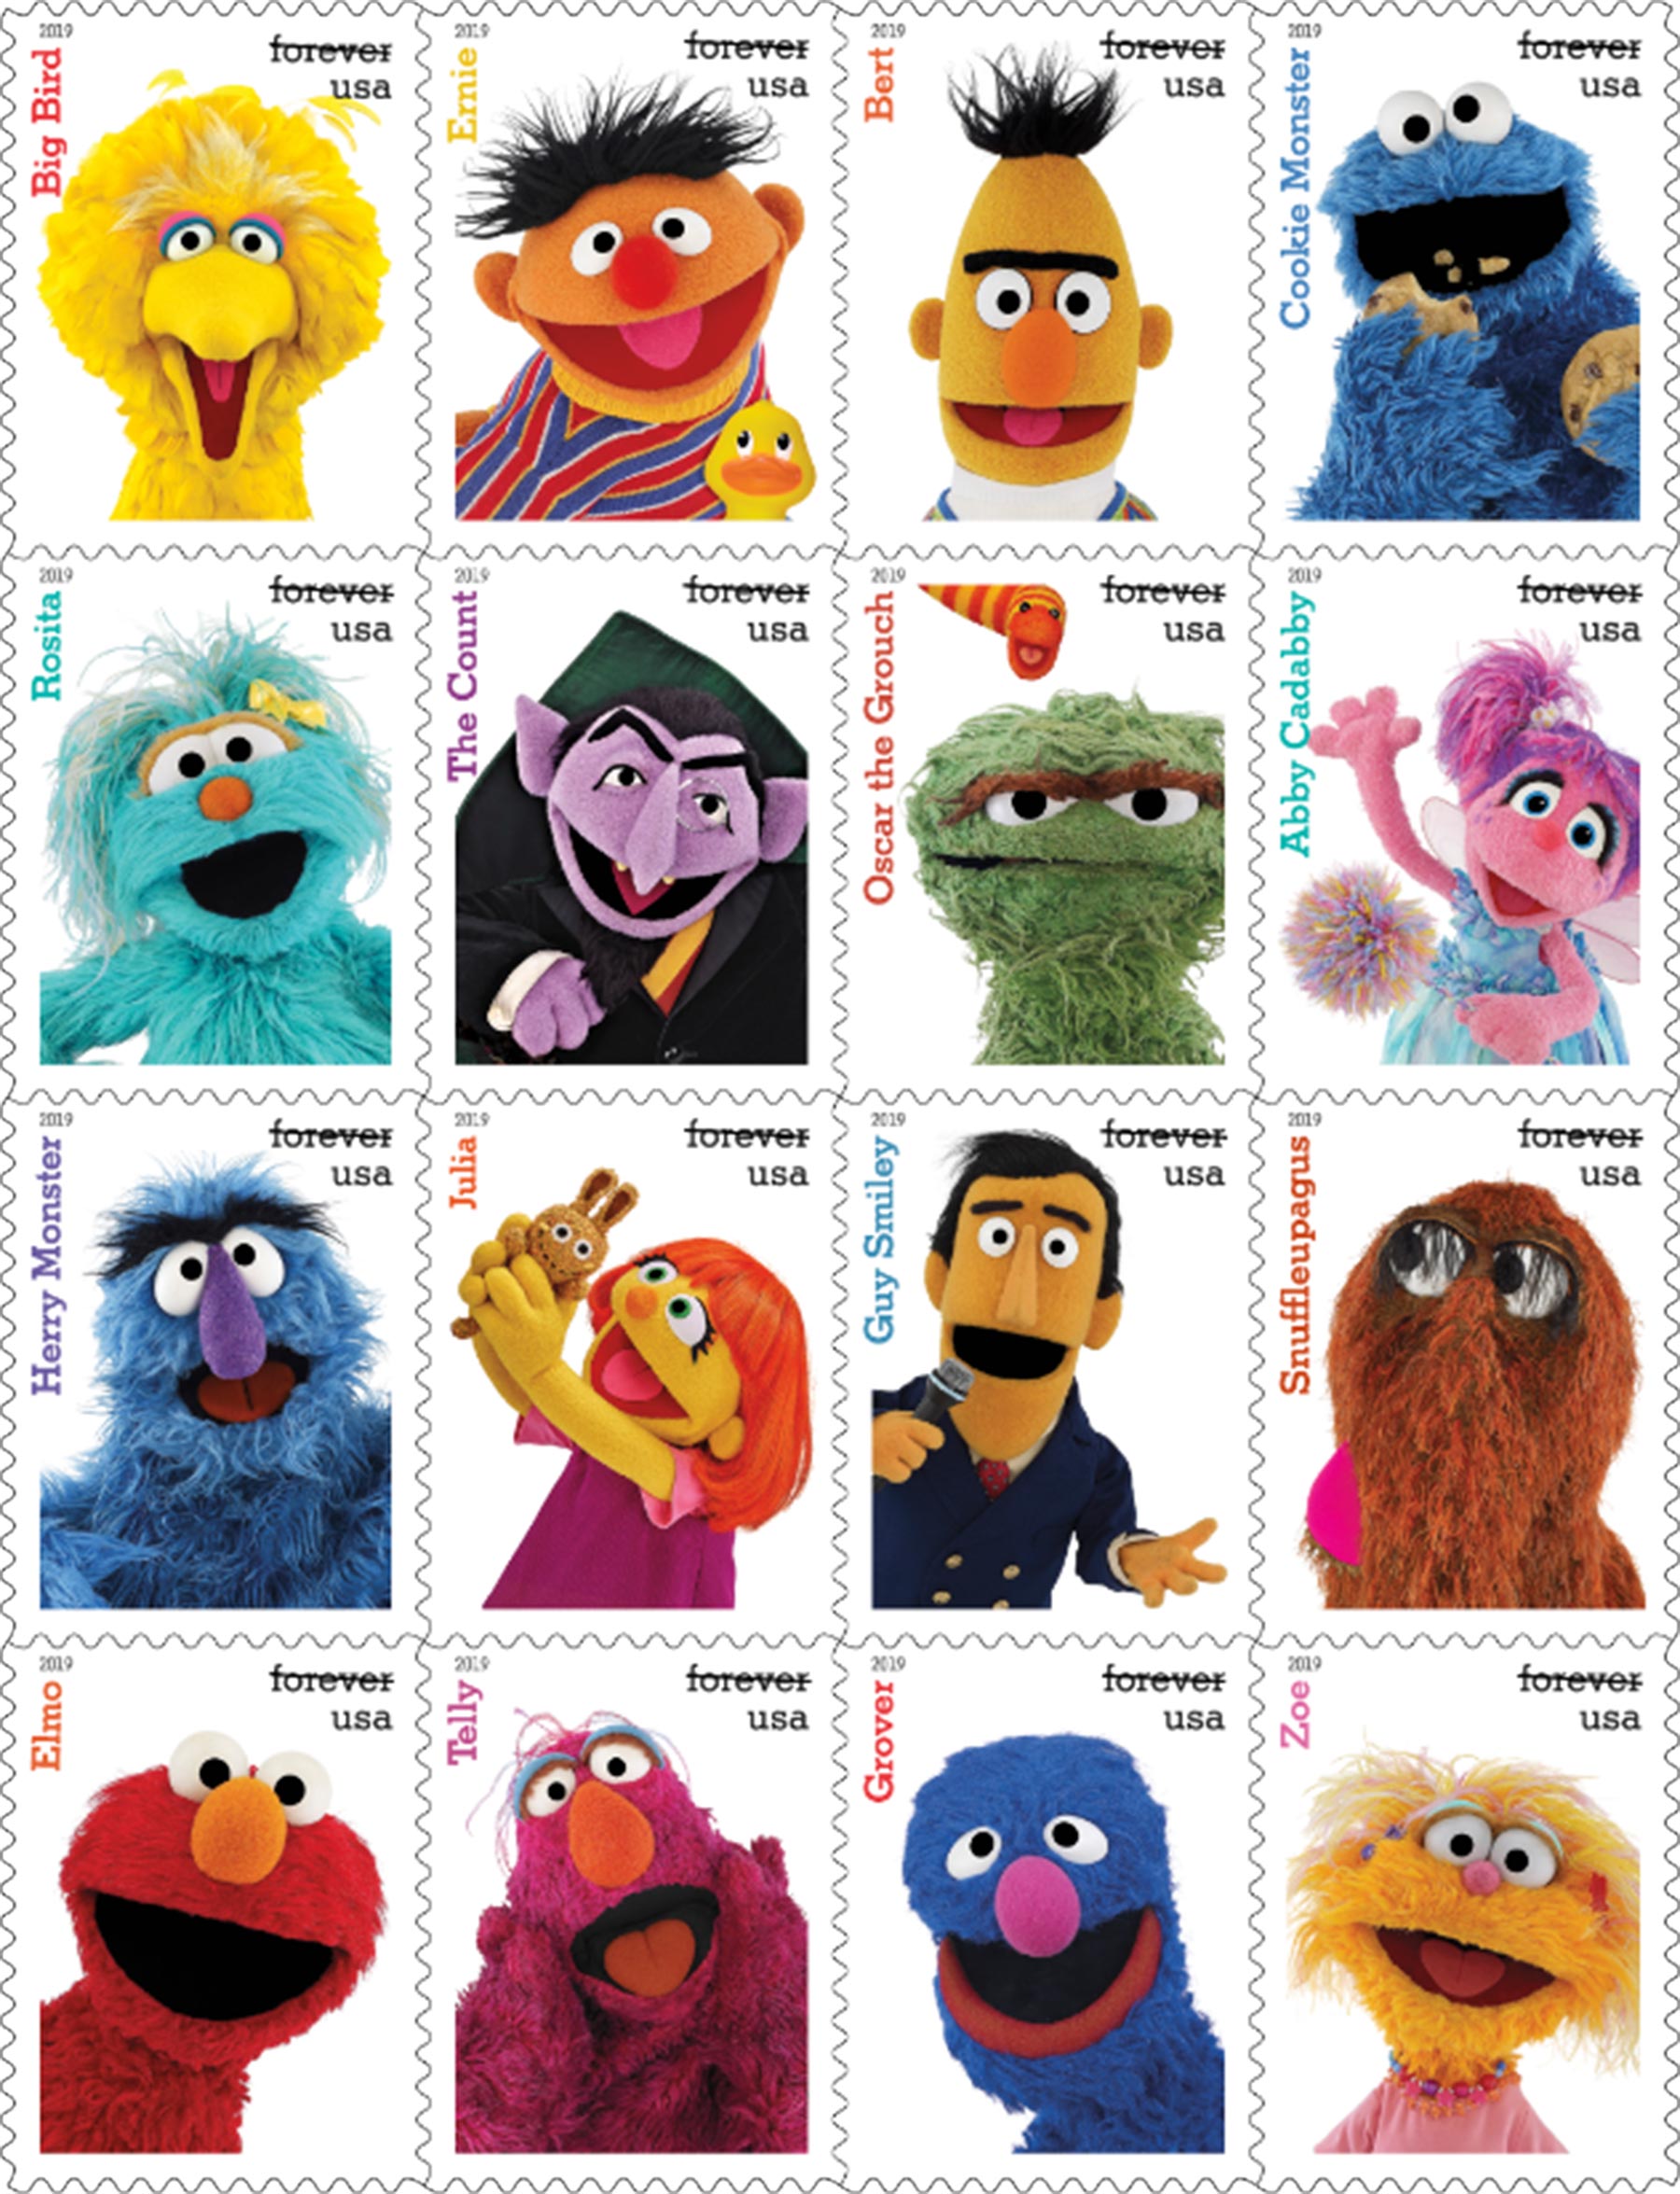 There’s One Little Problem with Those Sesame Street Stamps